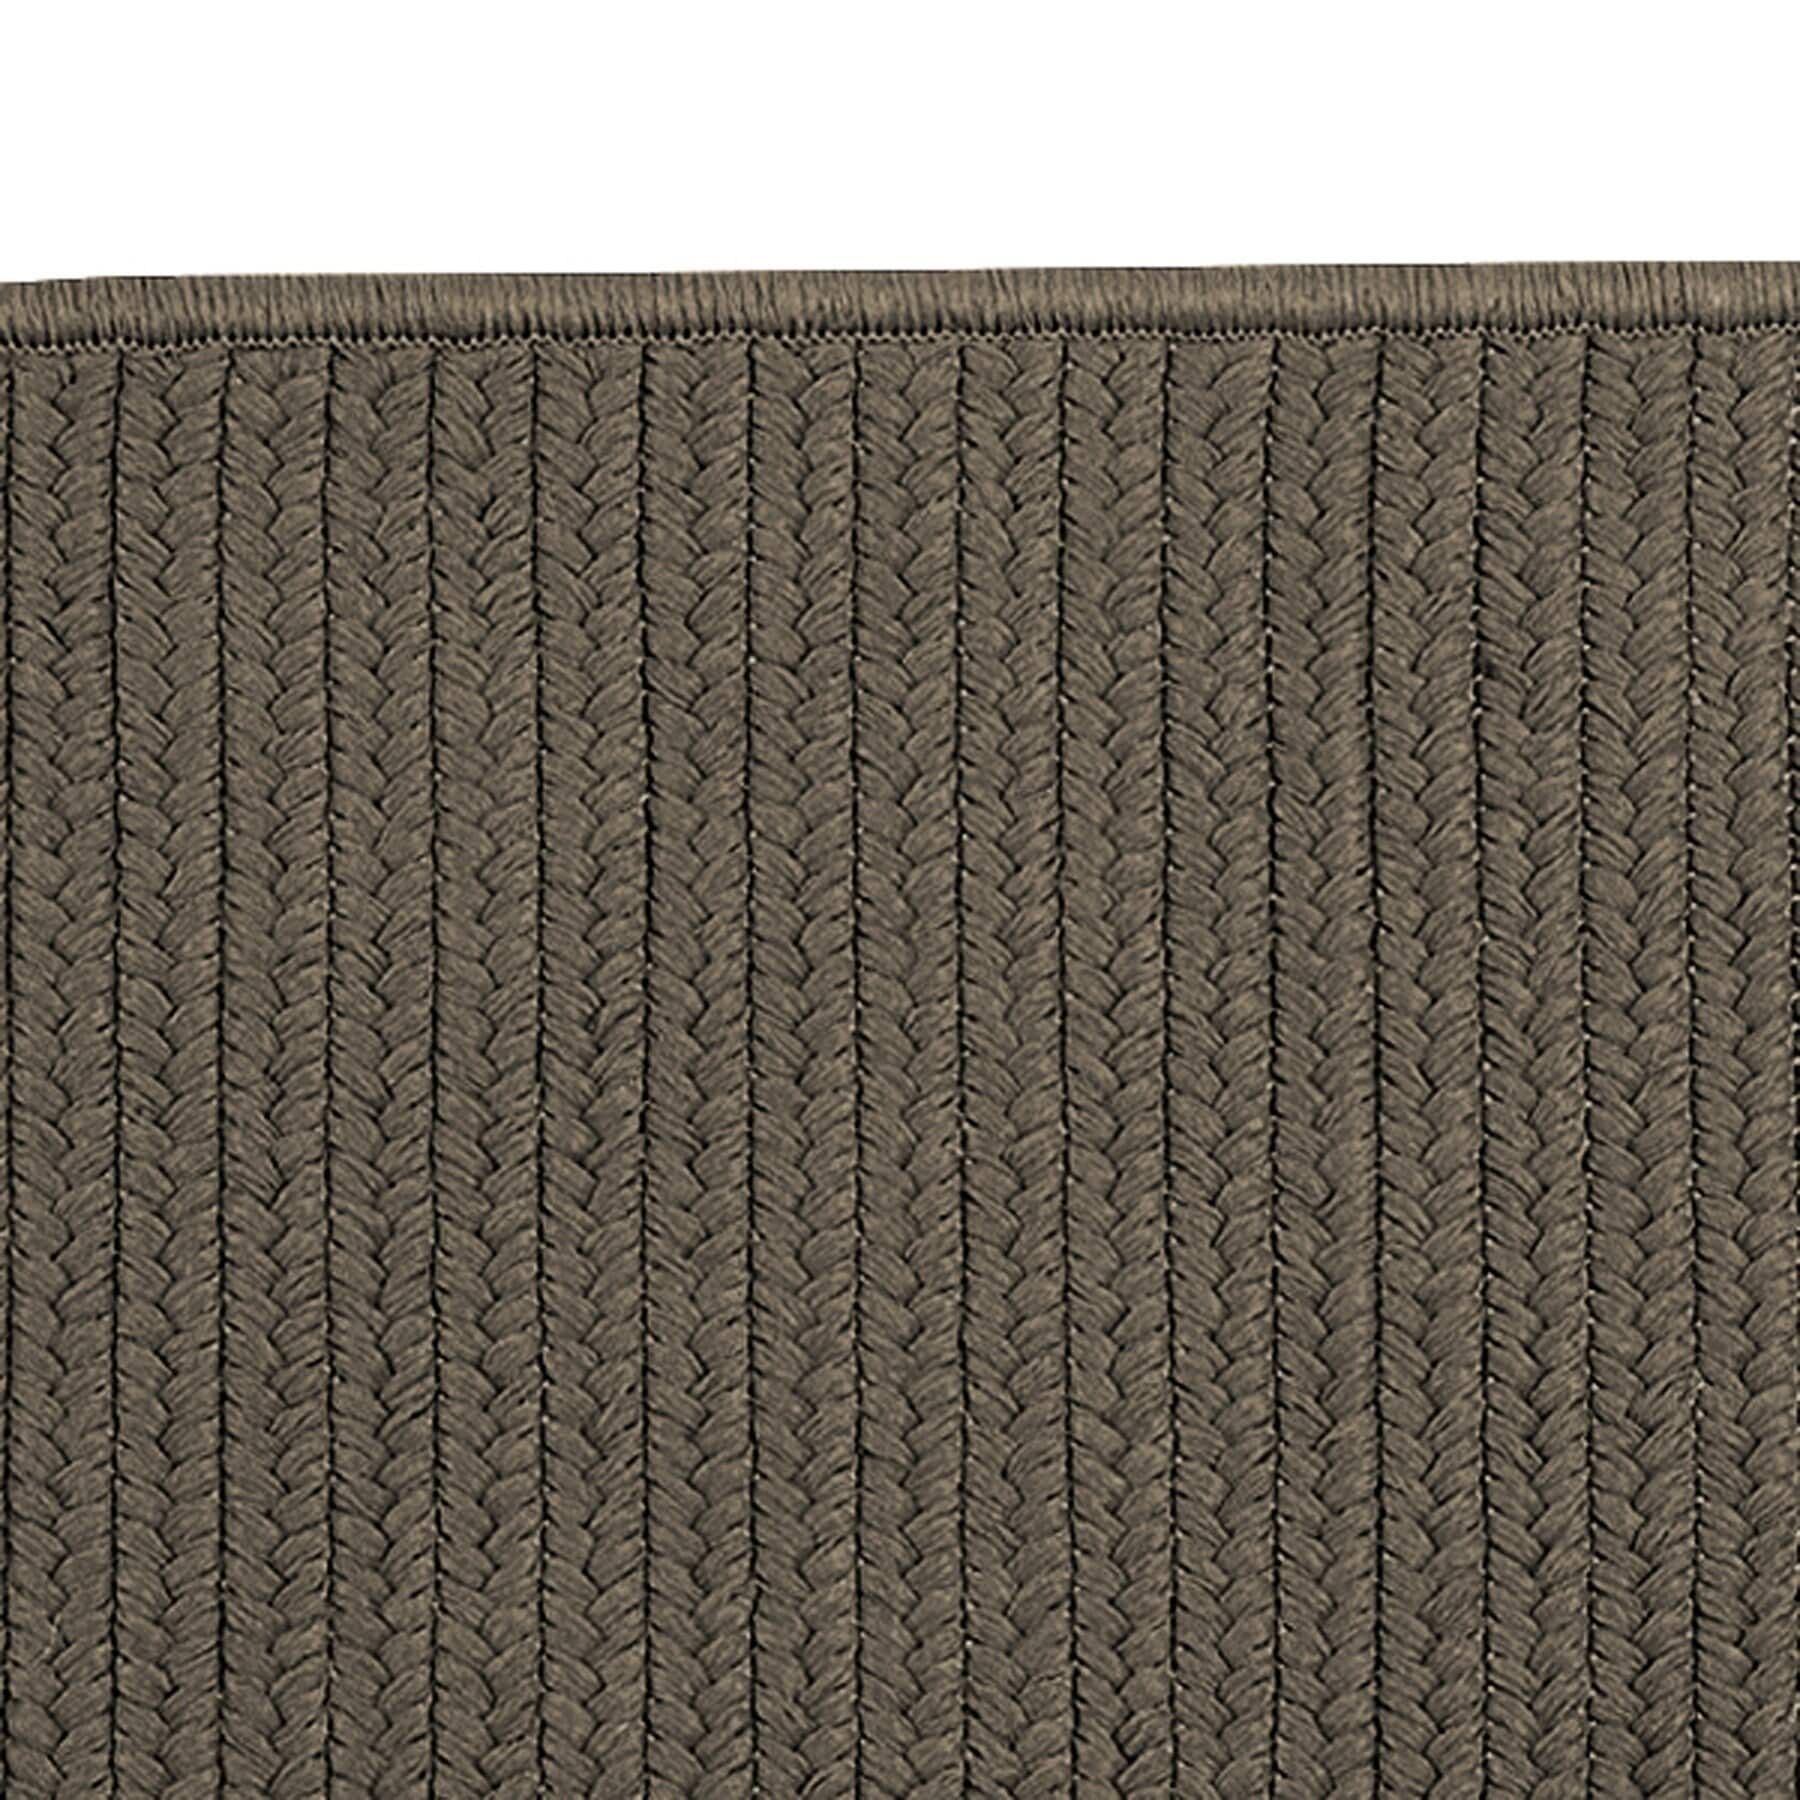 https://ak1.ostkcdn.com/images/products/is/images/direct/752f72a8de3773fd7d2ddebcd40ab47d73c21e8c/Low-profile-Solid-Color-Indoor-Outdoor-Reversible-Braided-Doormat.jpg